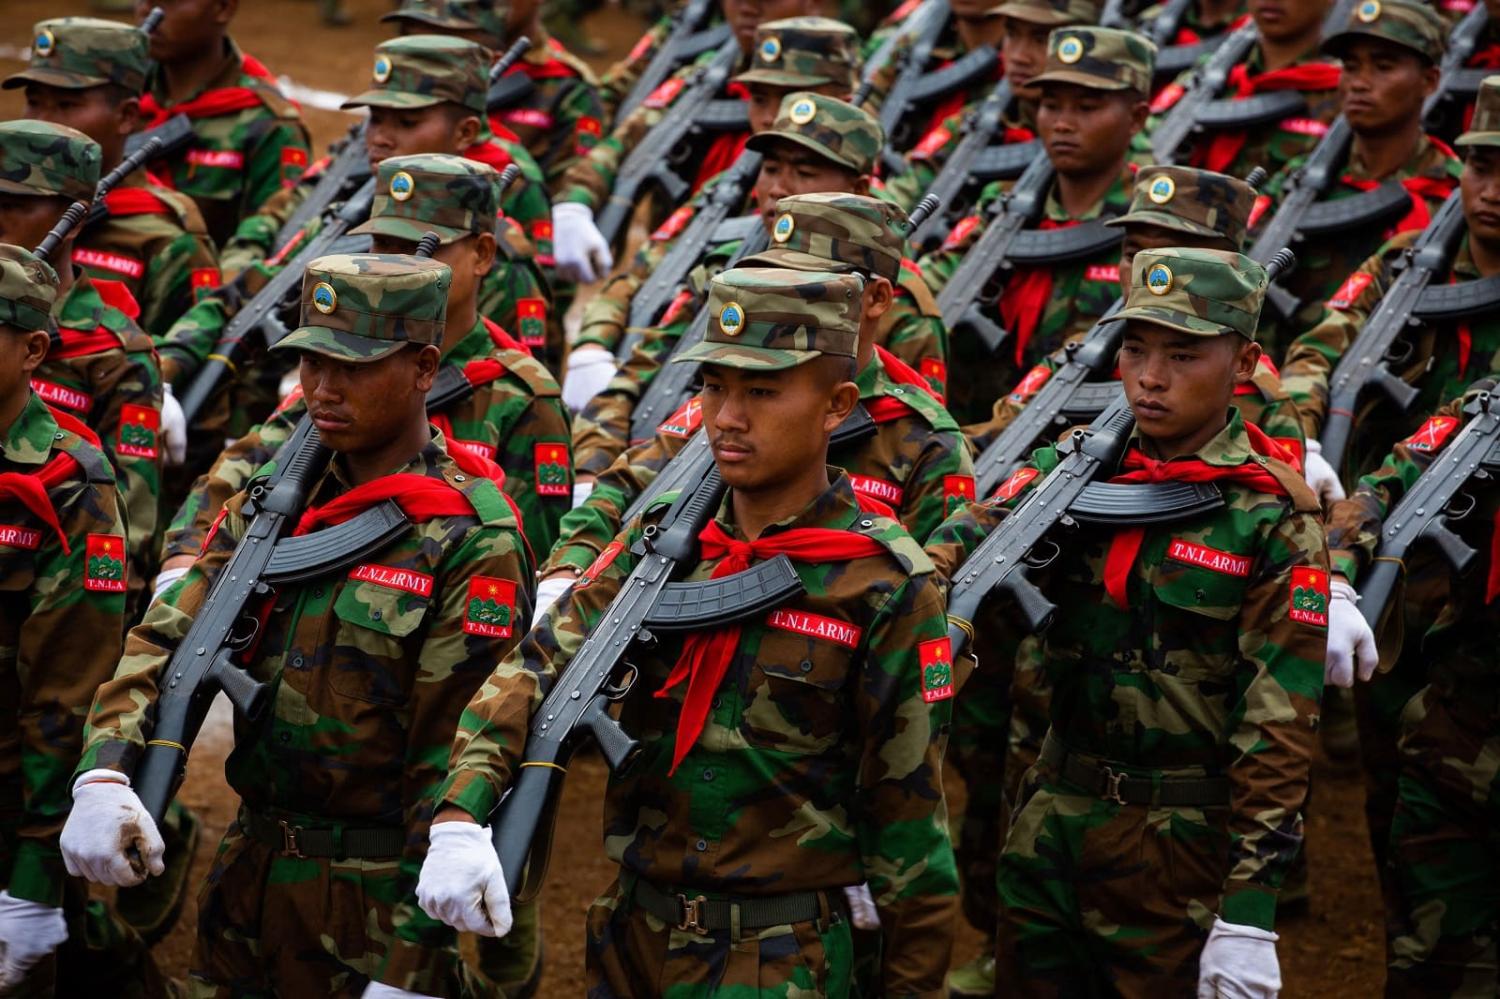 Some observers claim that Myanmar's opposition along with sympathetic ethnic armed organisations have effective control of the country (STR/AFP via Getty Images)